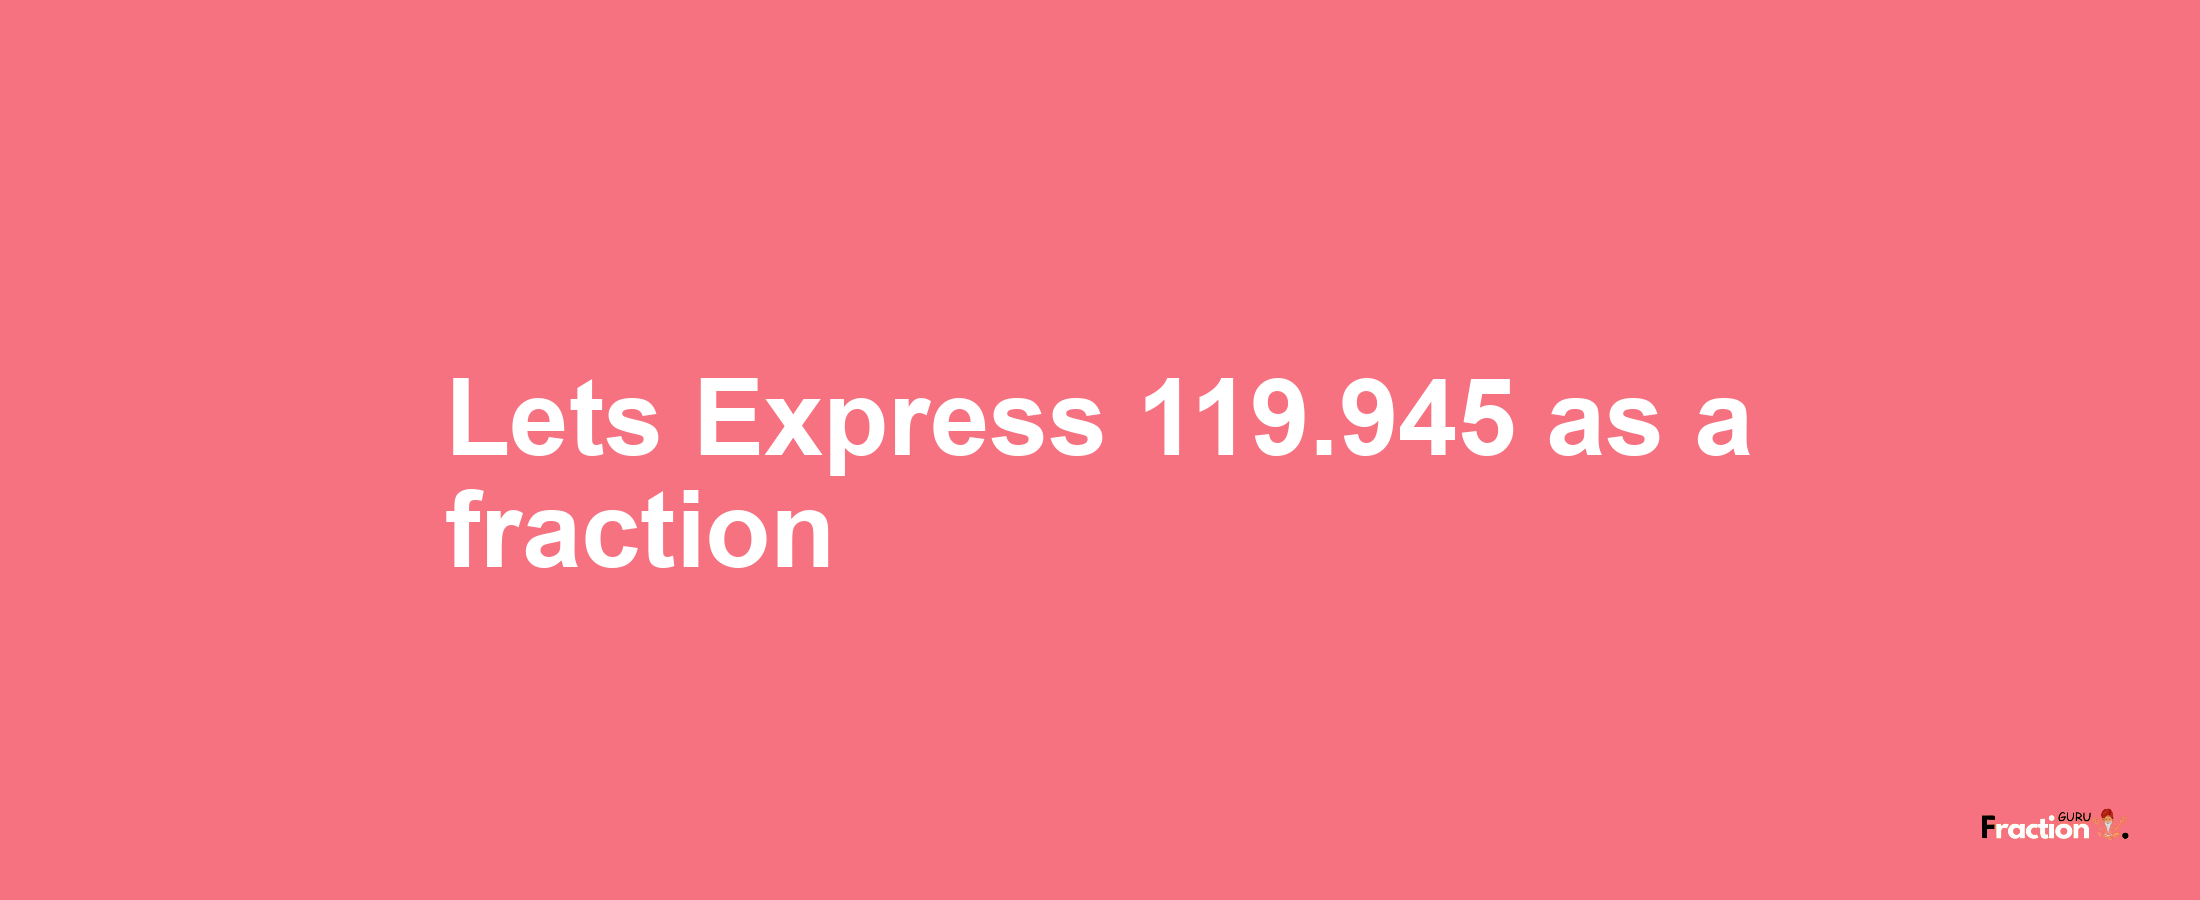 Lets Express 119.945 as afraction